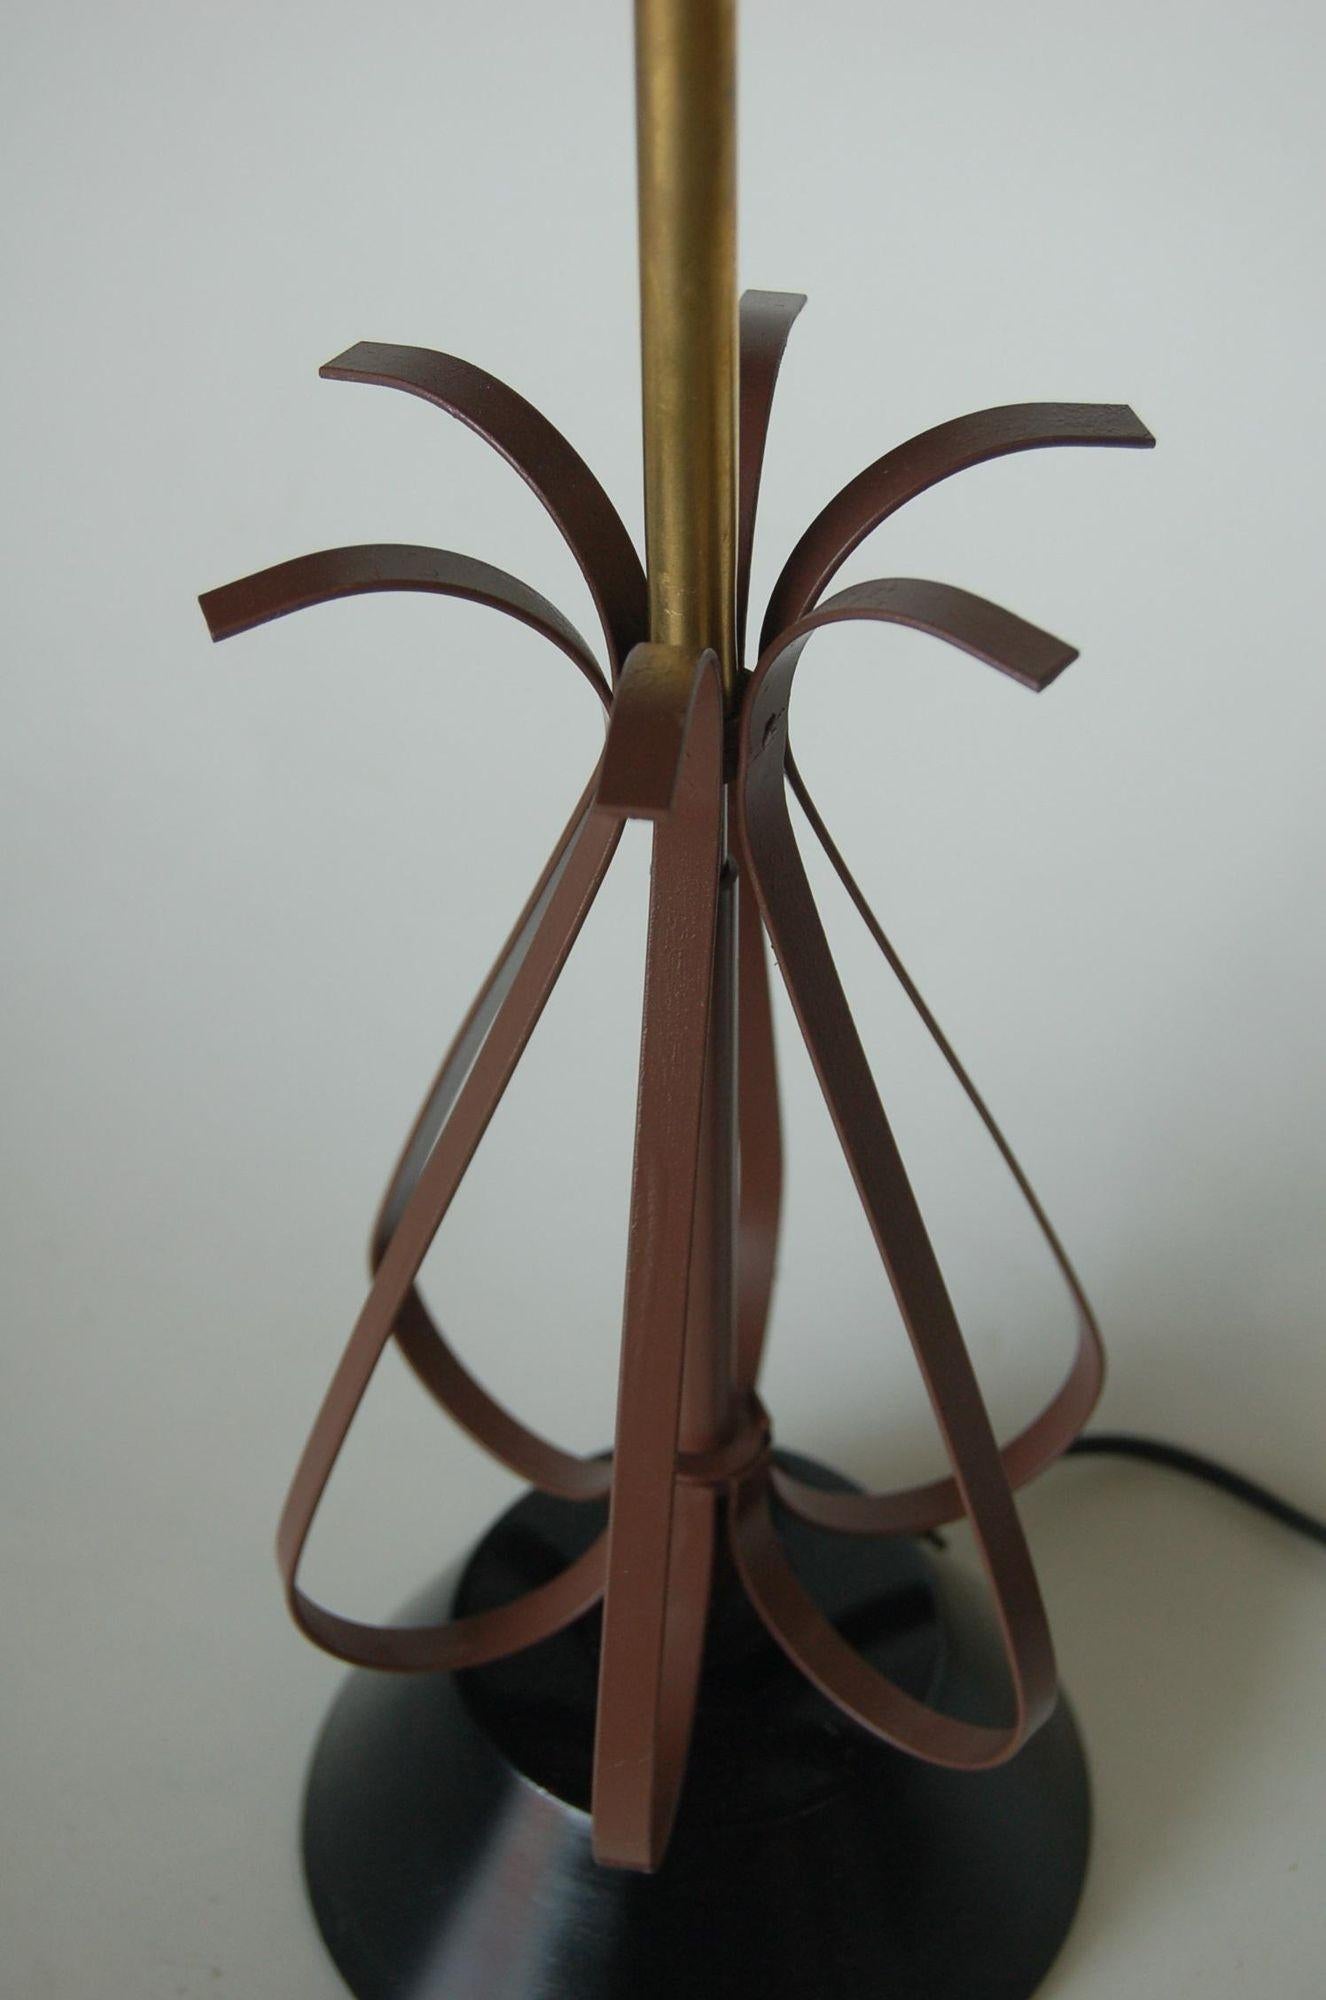 Midcentury Scalloped Steel and Brass Table Lamp In Excellent Condition For Sale In Van Nuys, CA